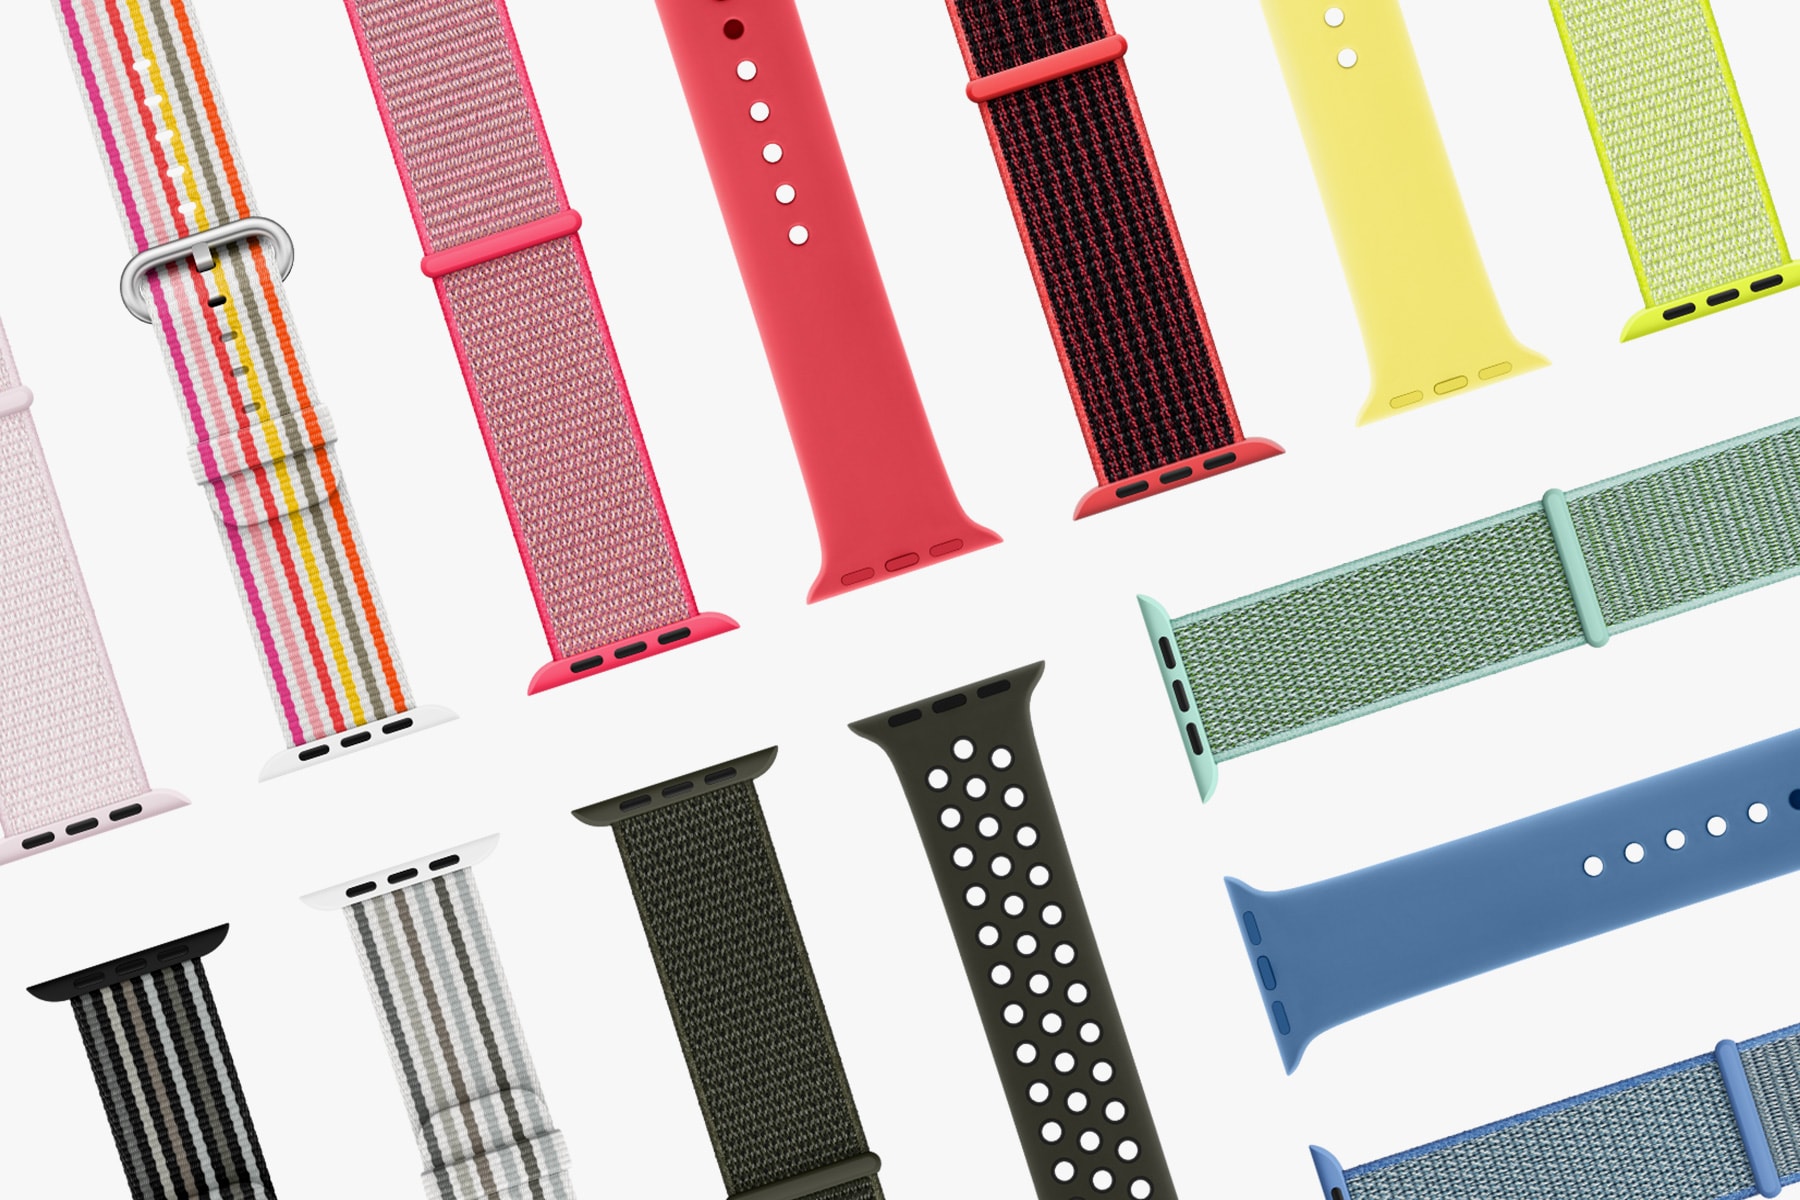 Apple Watch Bands From Nike and Hermes